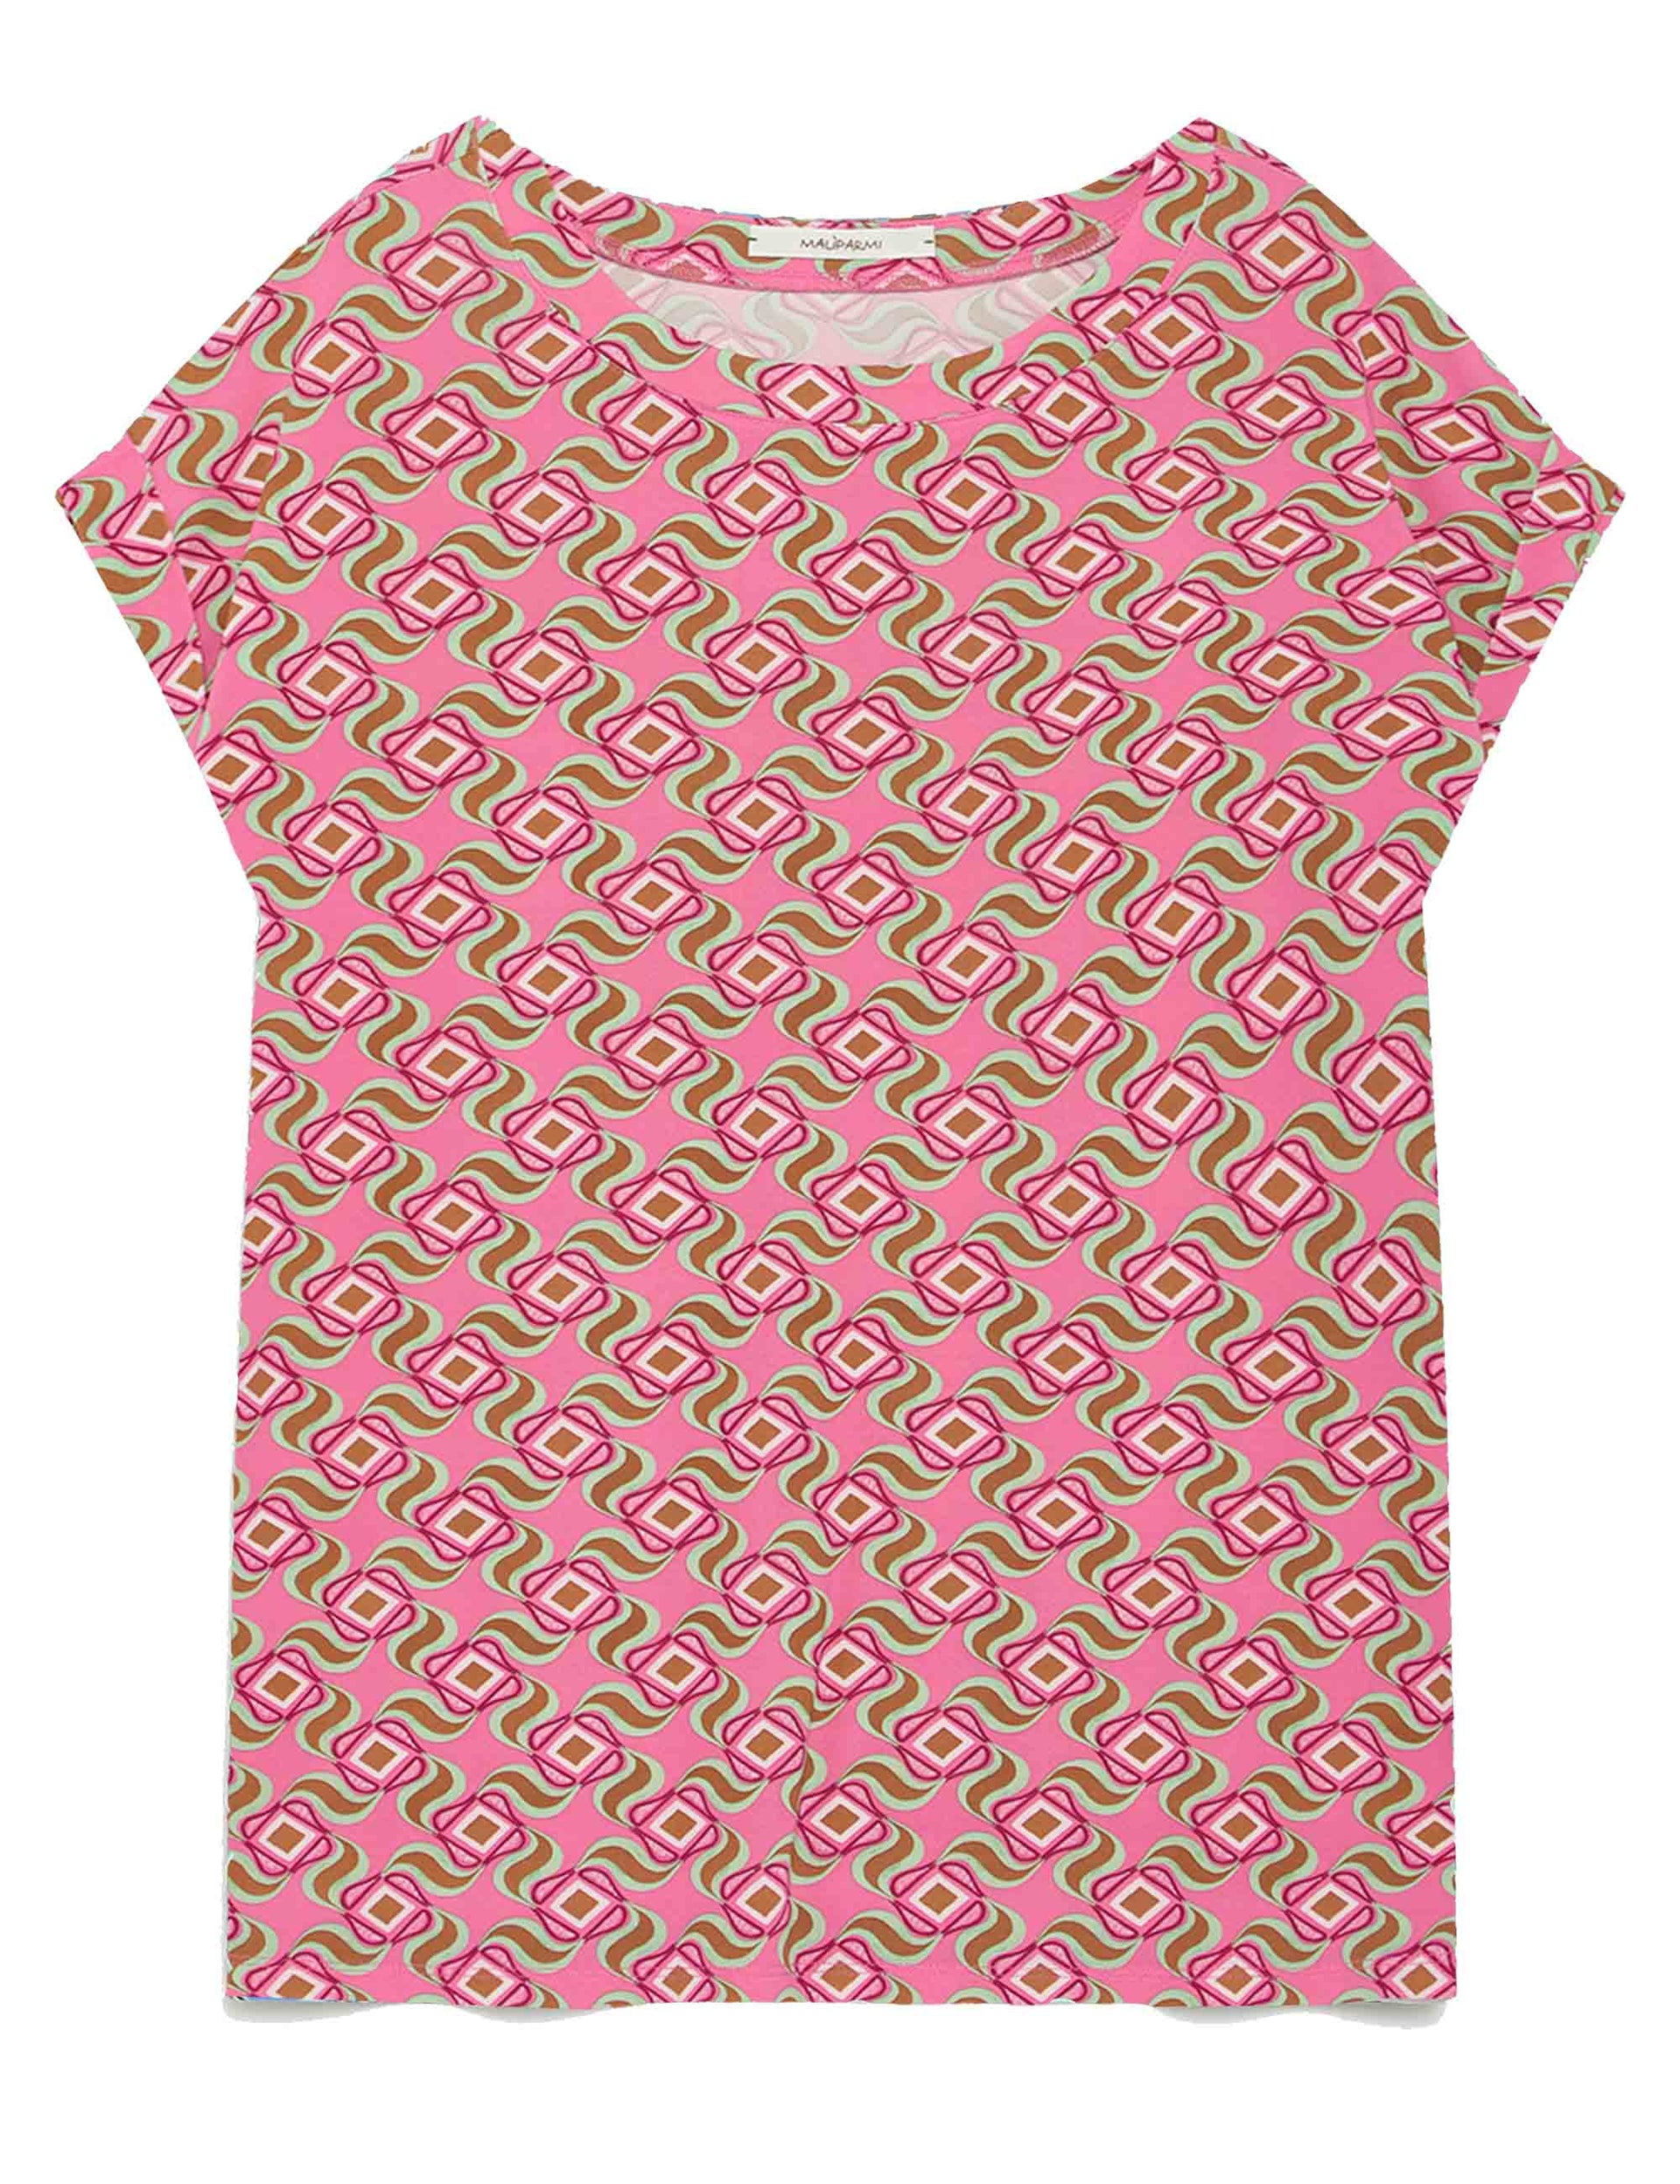 Swirl Print women's t-shirt in patterned pink jersey with cap sleeves